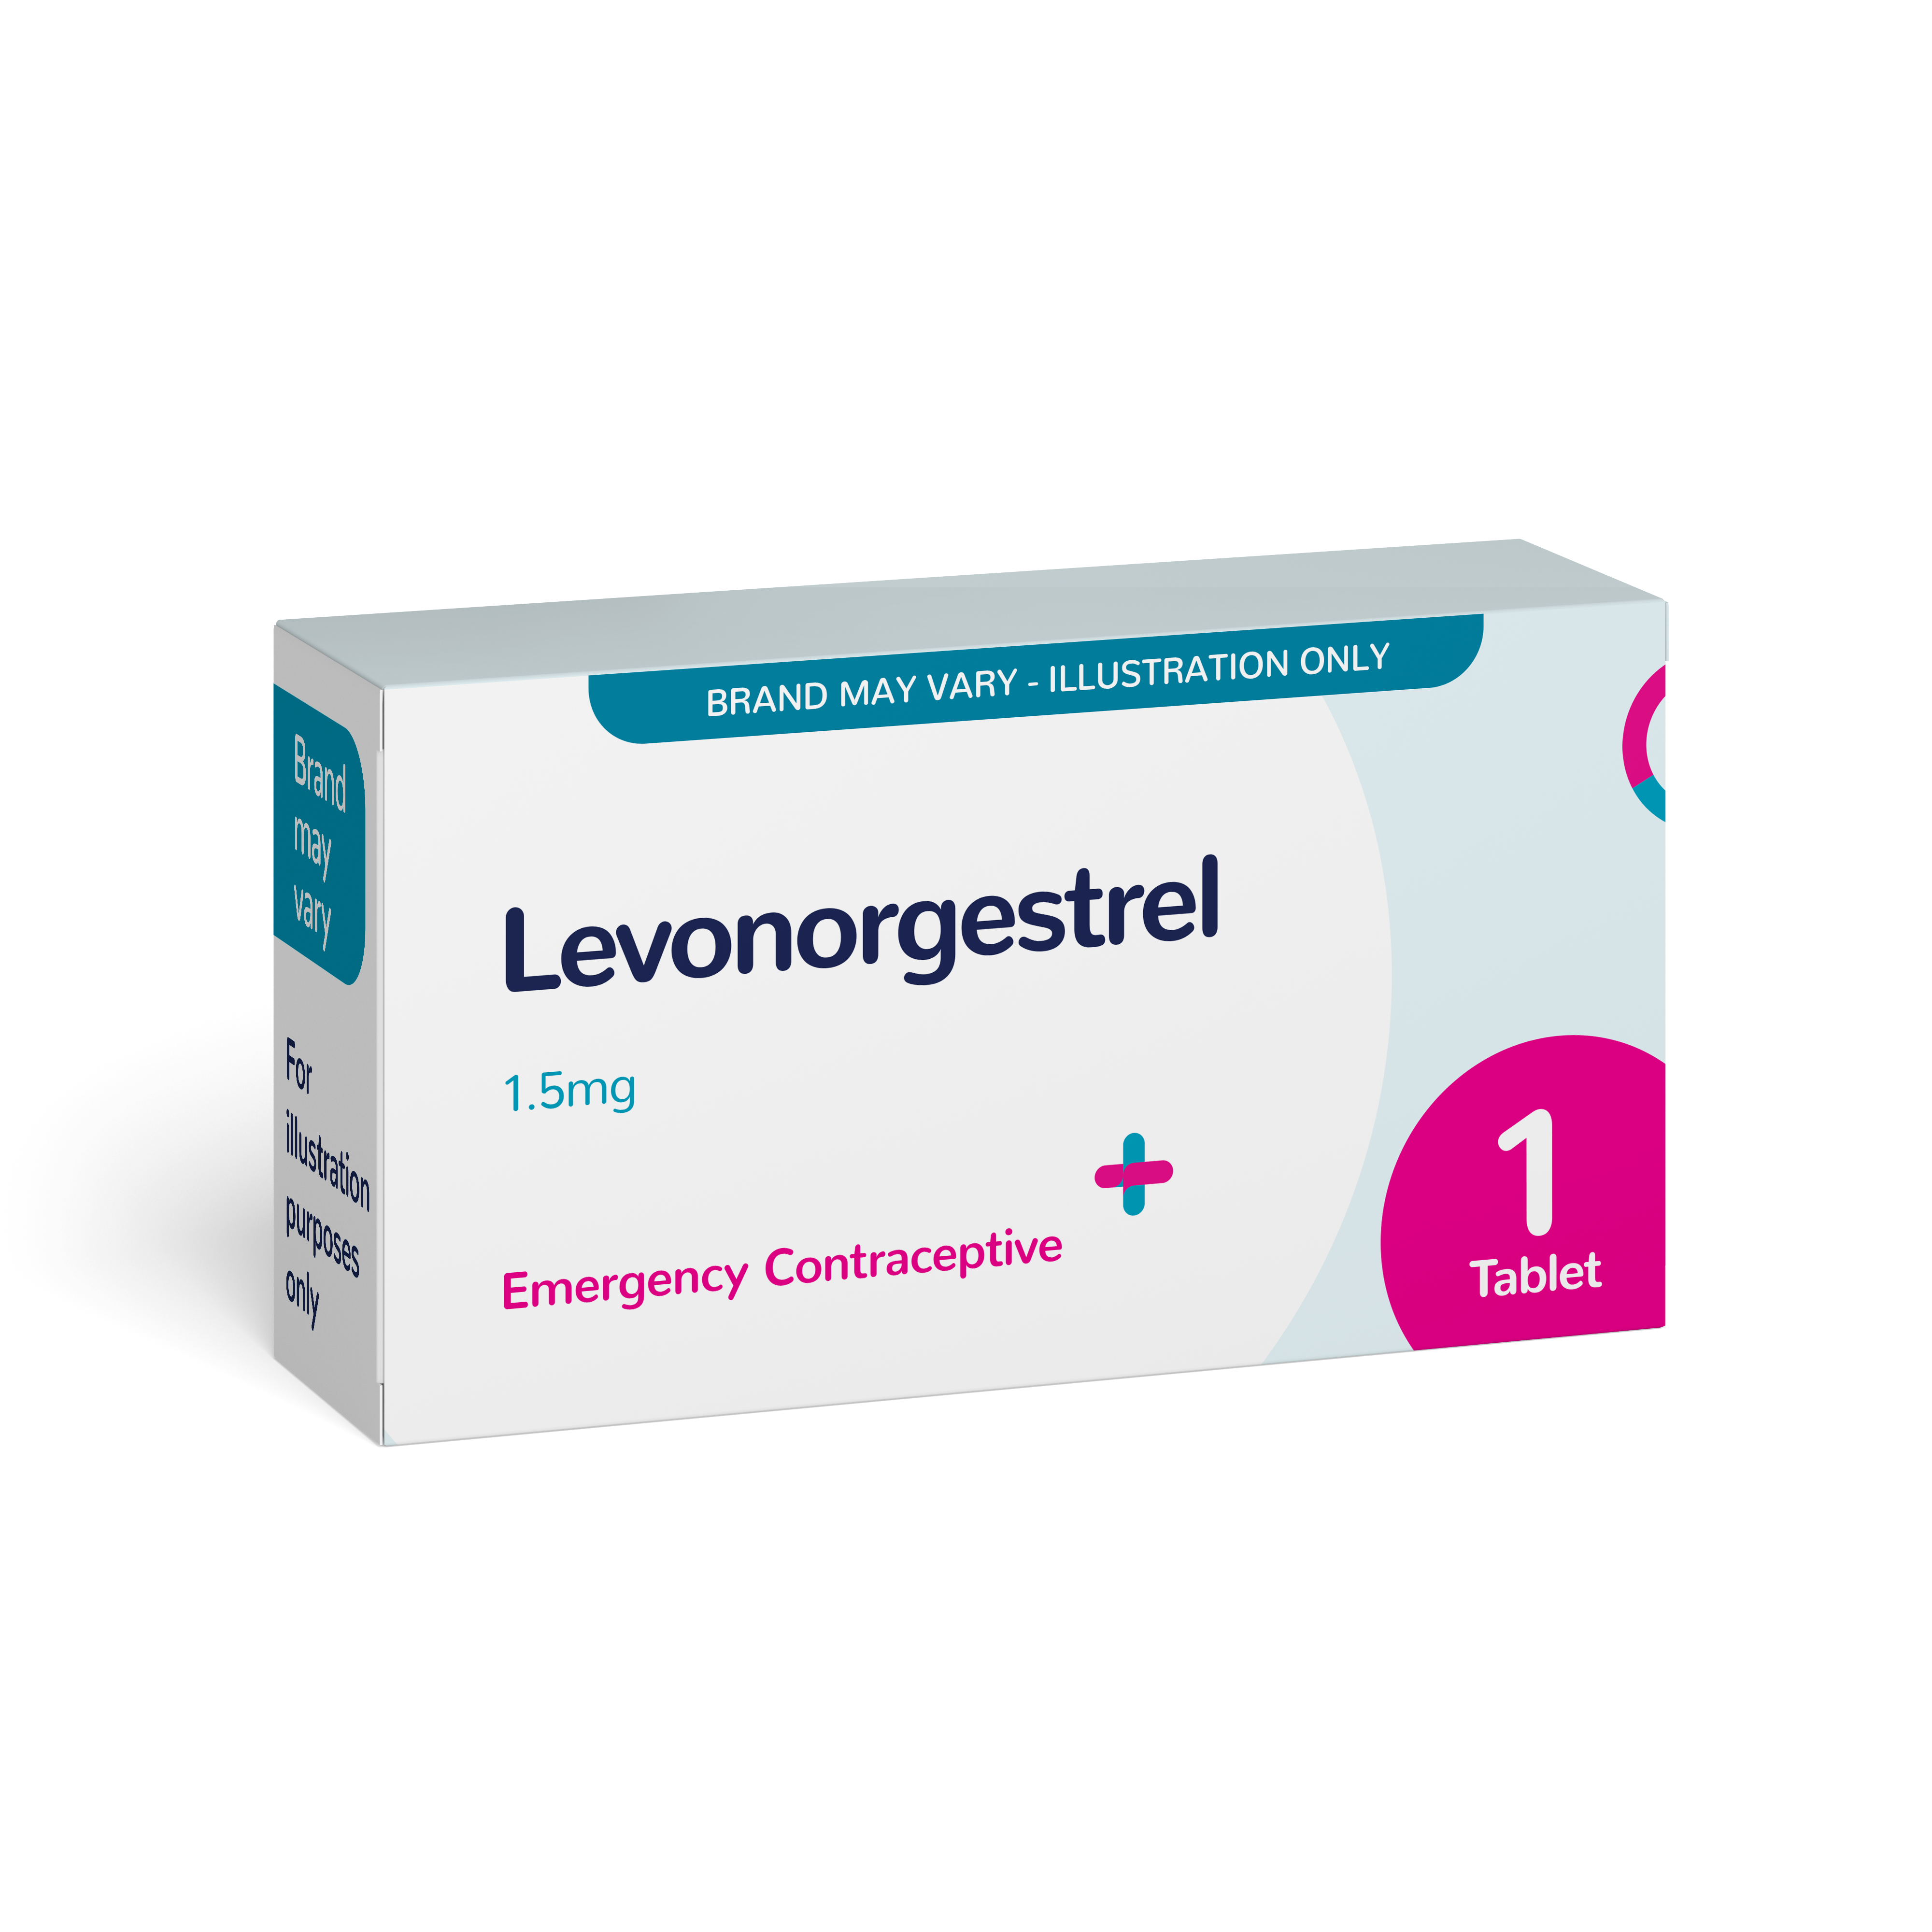 Levonorgestrel 1500mcg Emergency Contraceptive Pill  "Morning After" (Brand May Vary)